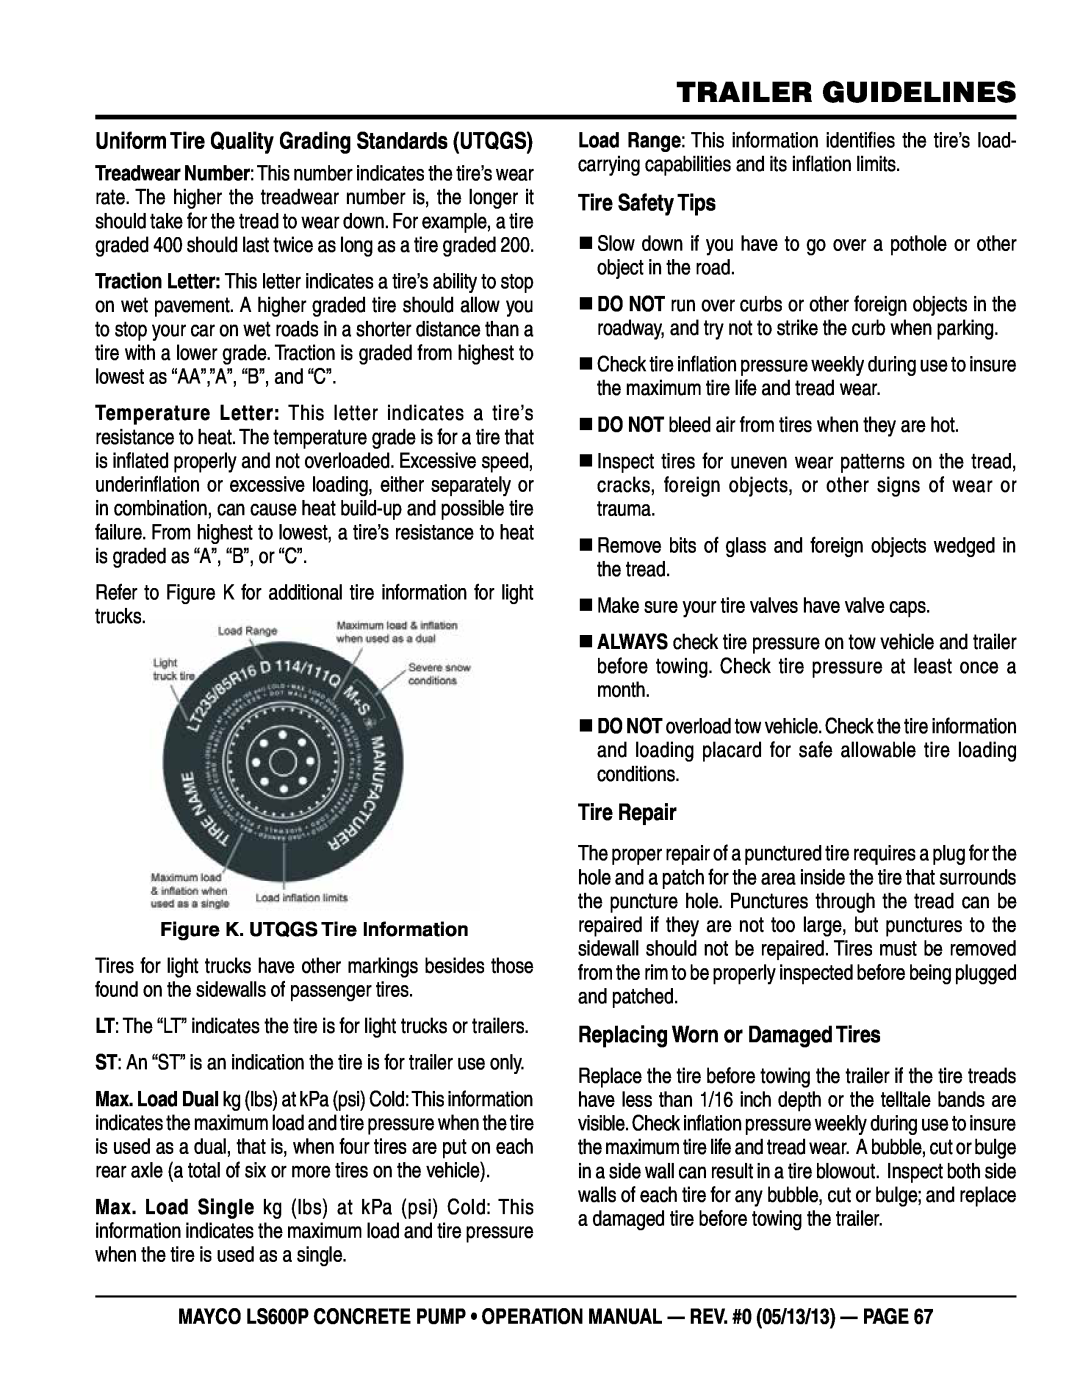 Multiquip LS600P operation manual Tire Safety Tips, Tire Repair, Replacing Worn or Damaged Tires, trailer guidelines 